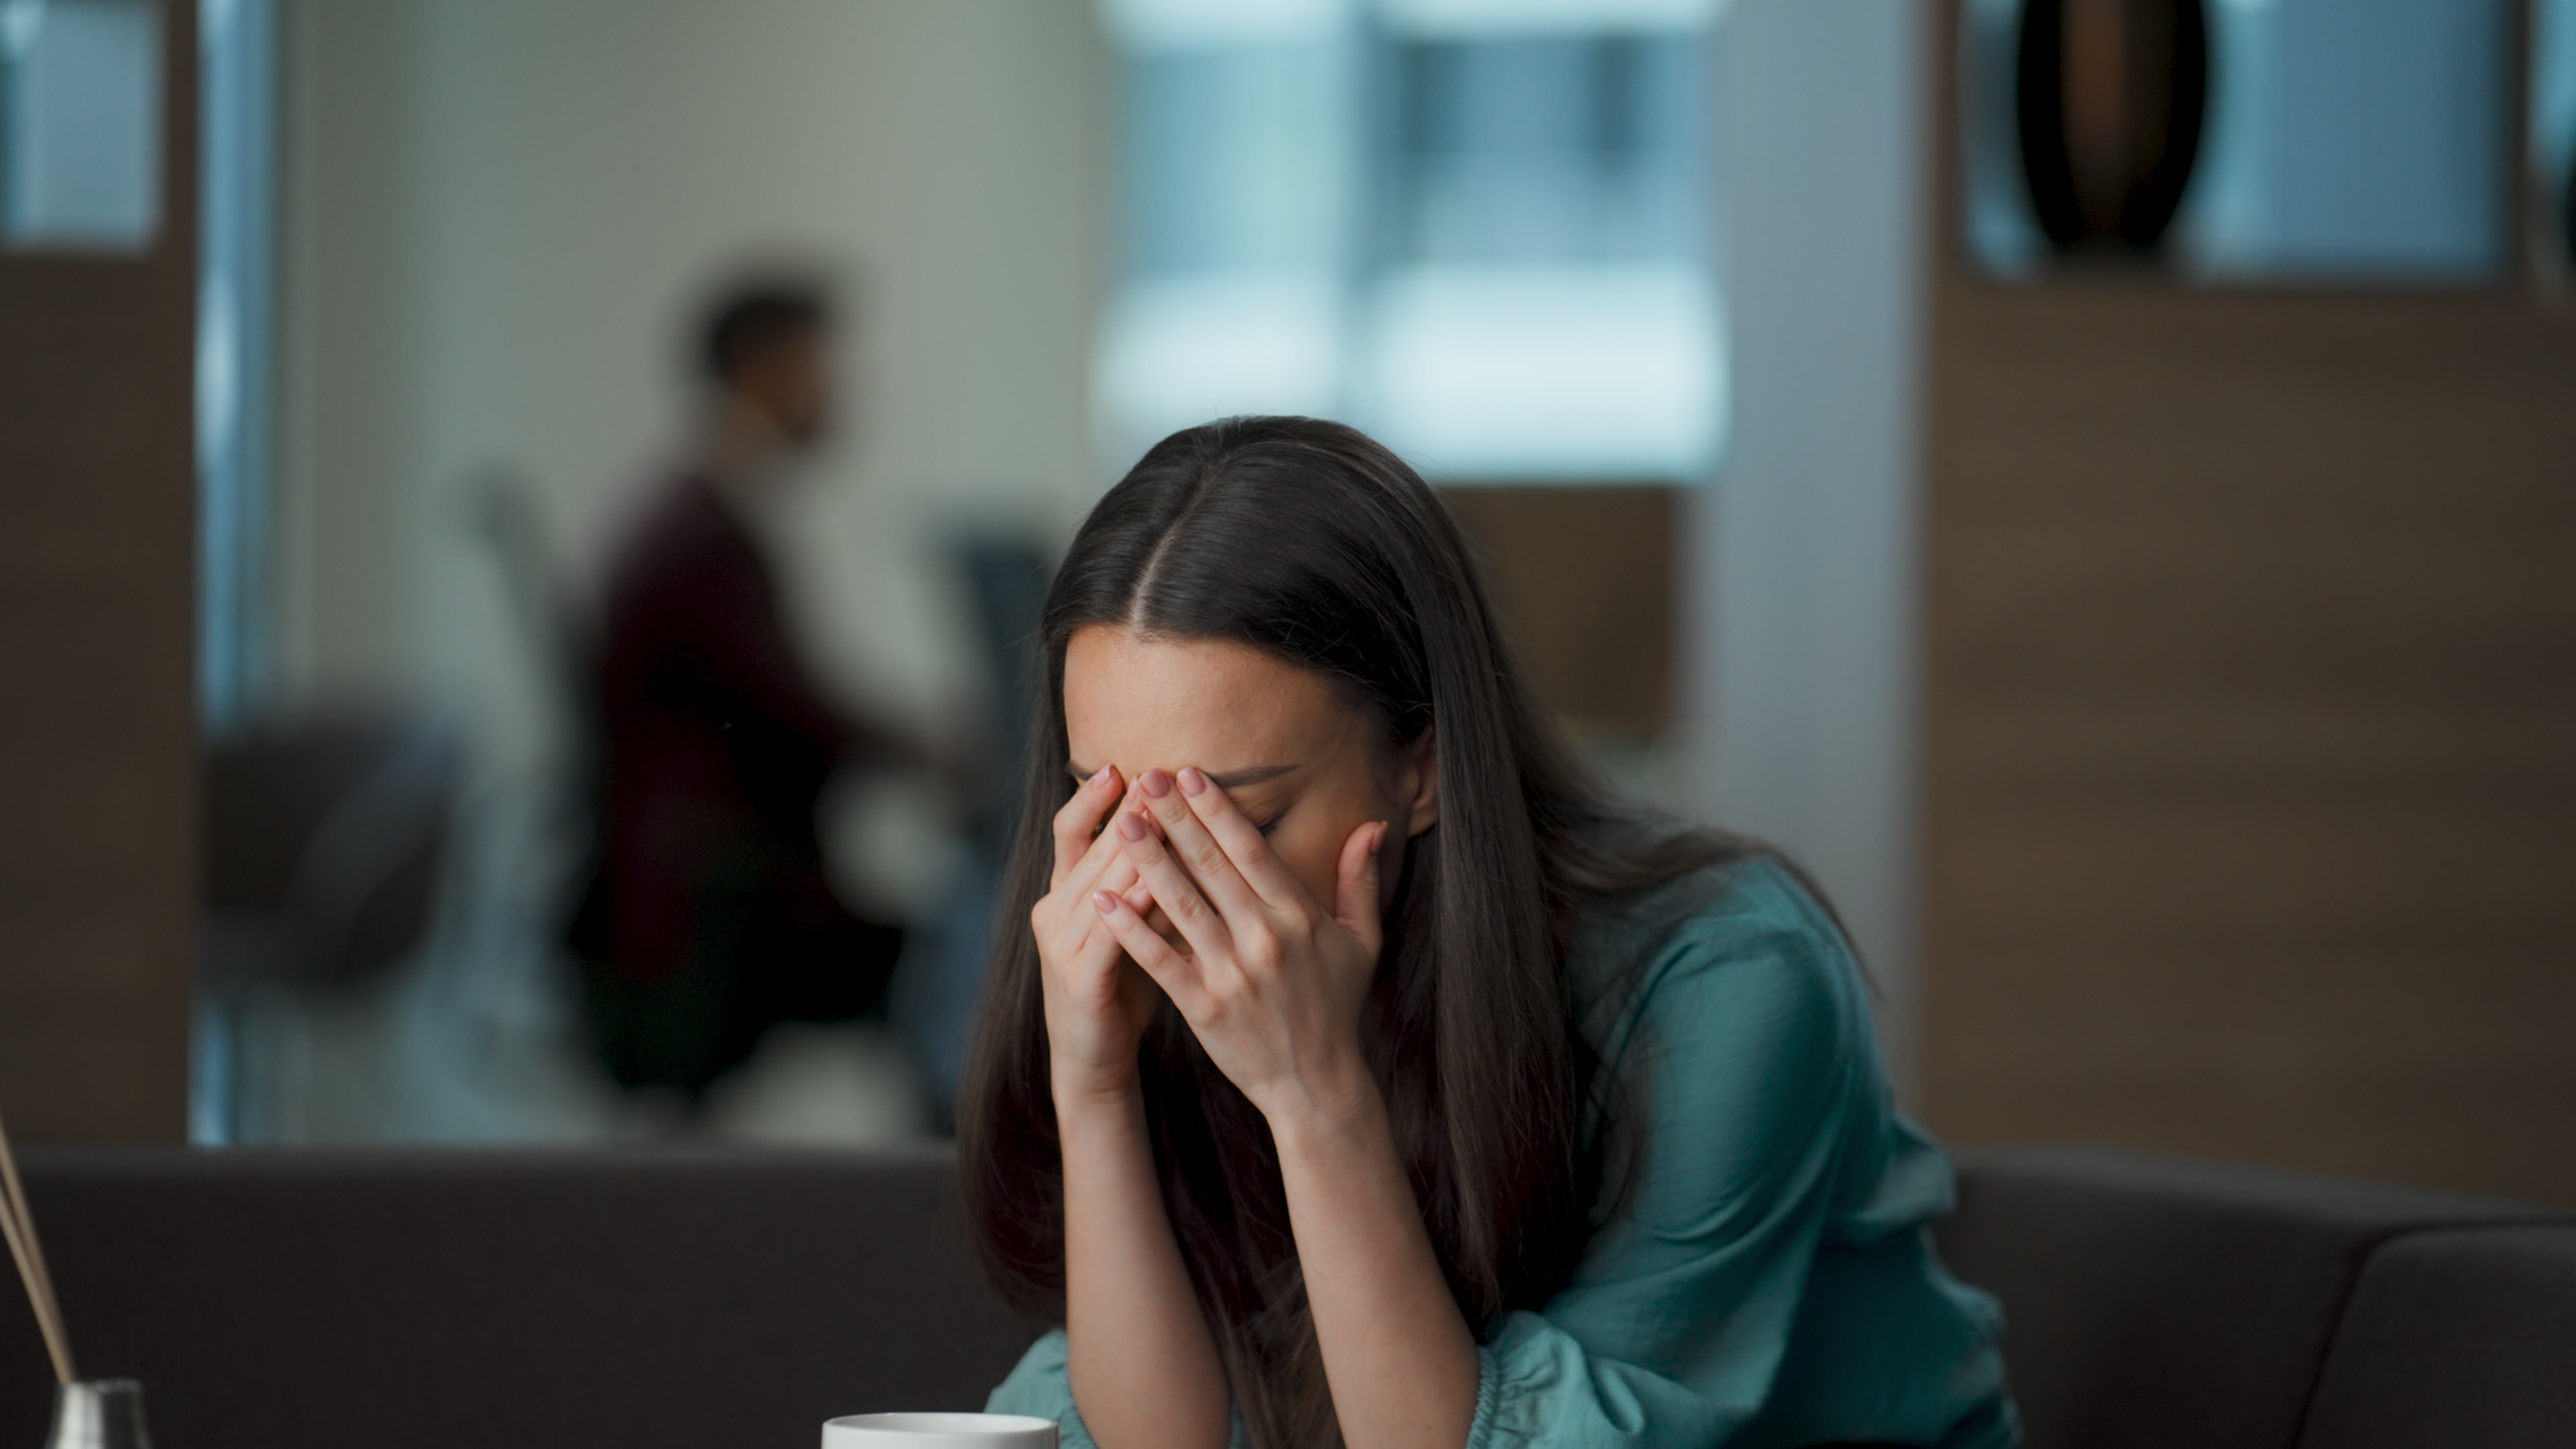 How Can I Keep Calm and Carry on When Facing a Panic Attack at Work? 